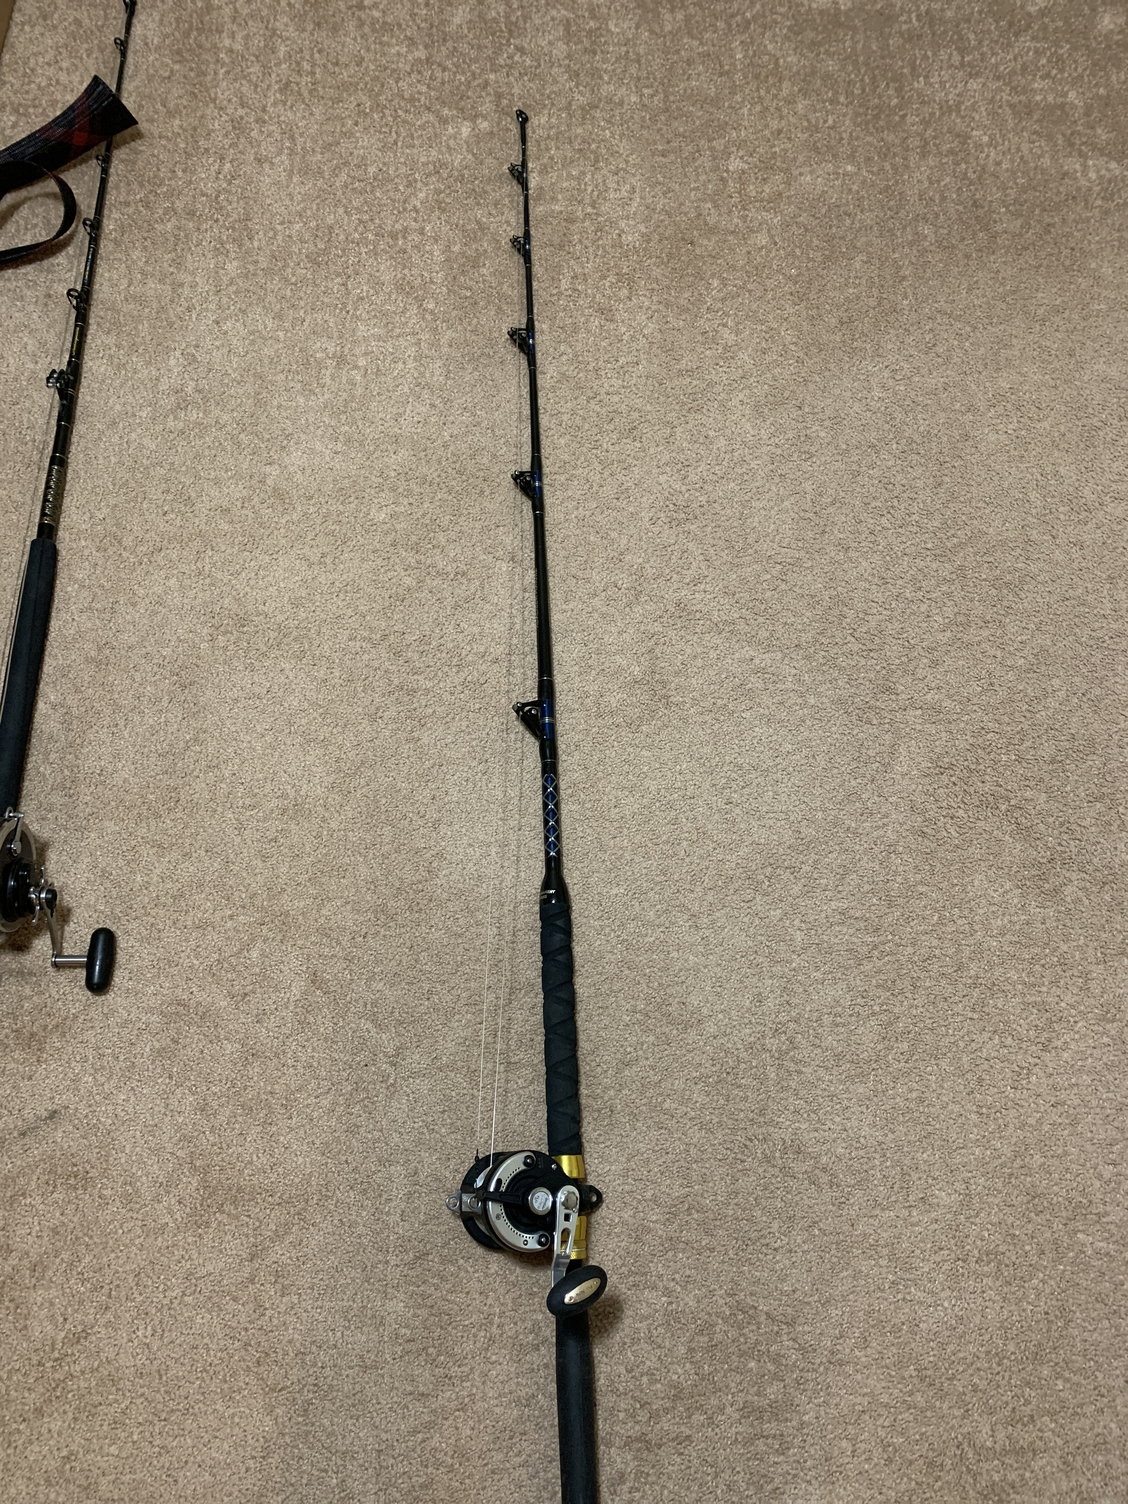 Fishing gear rigging help/advice - The Hull Truth - Boating and